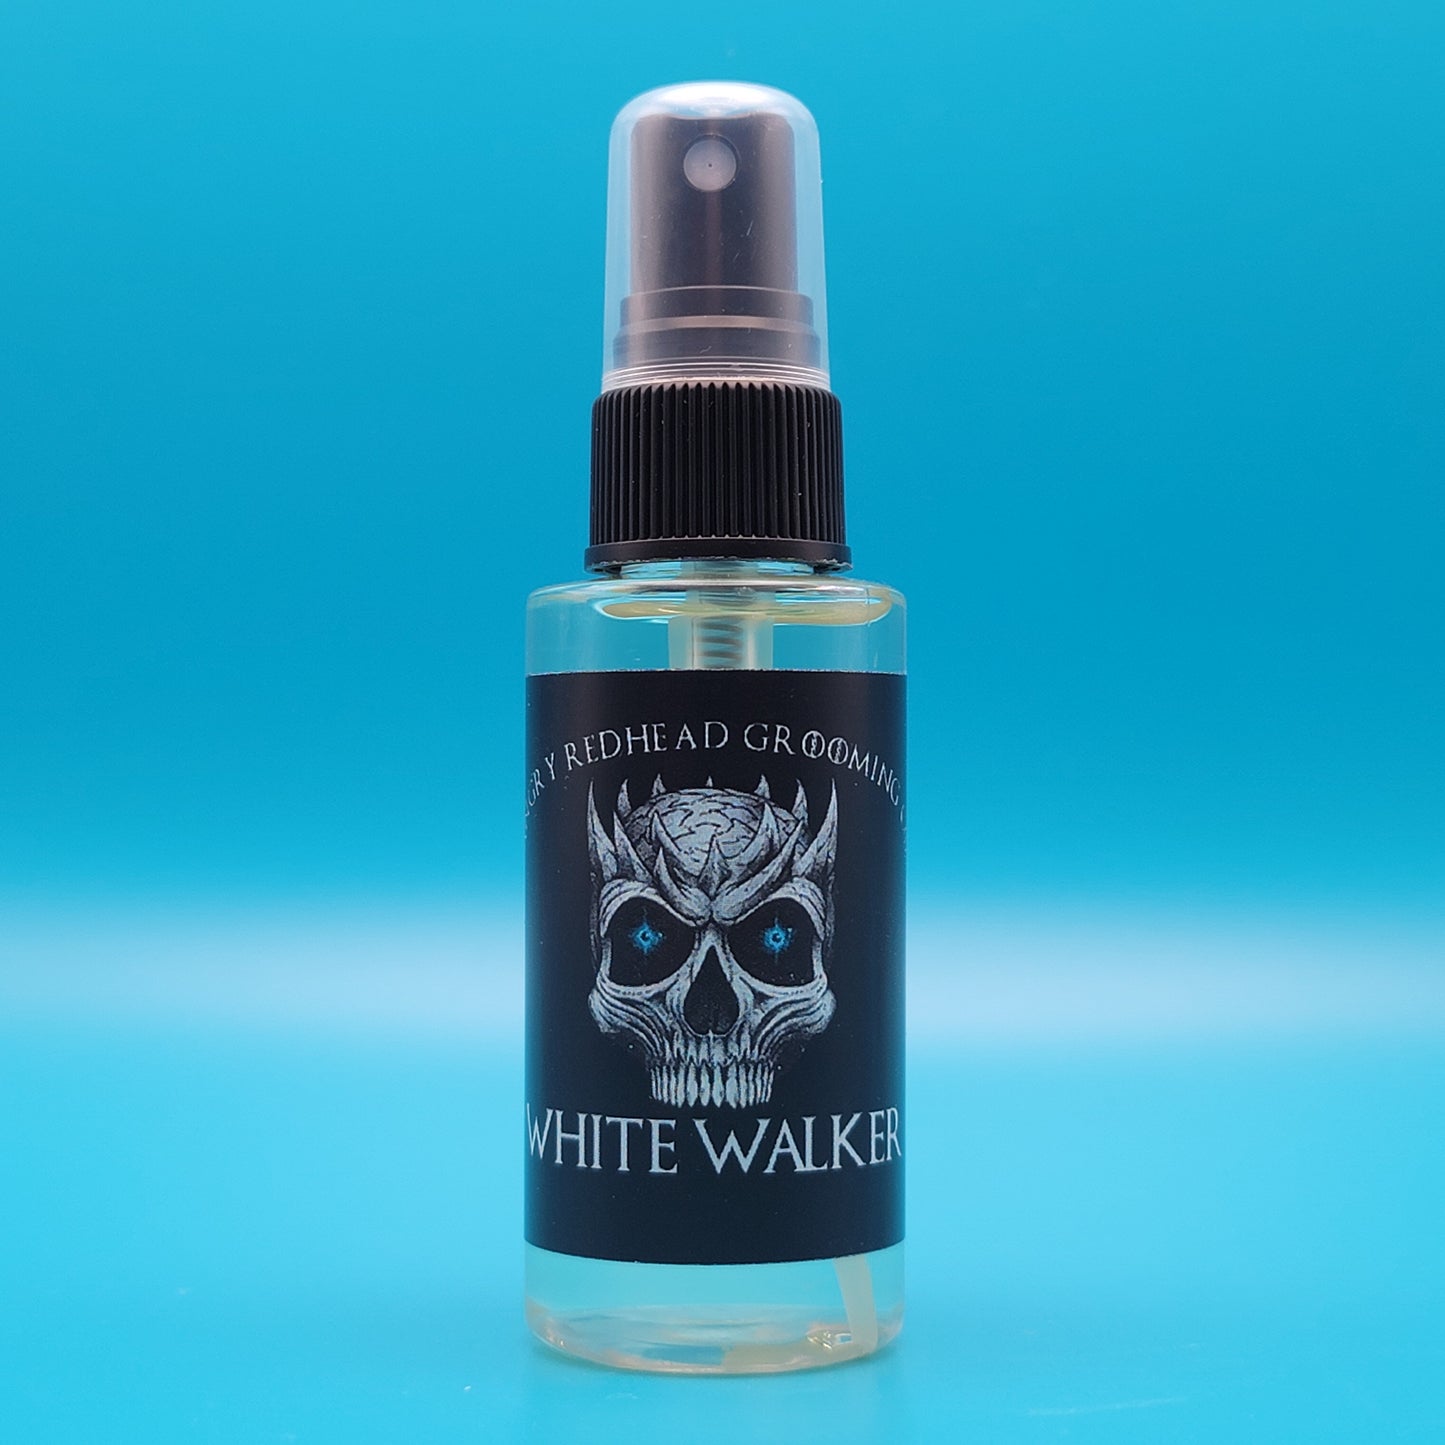 White Walker Cologne by Angry Redhead Grooming Co - angryredheadgrooming.com